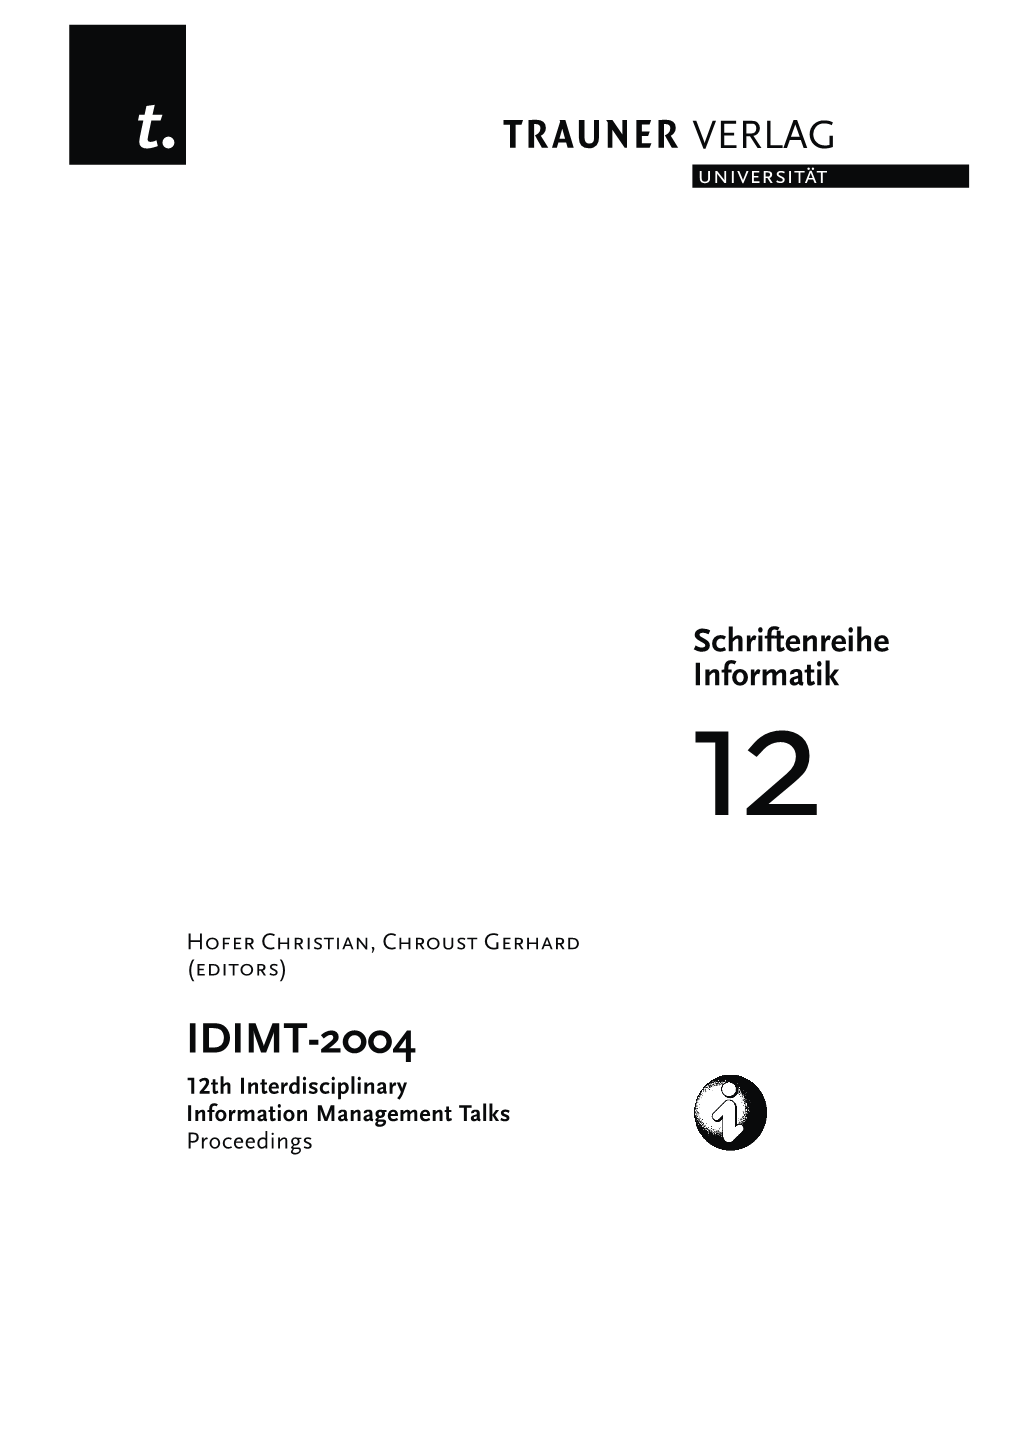 Proceedings from the IDIMT Conference 2004